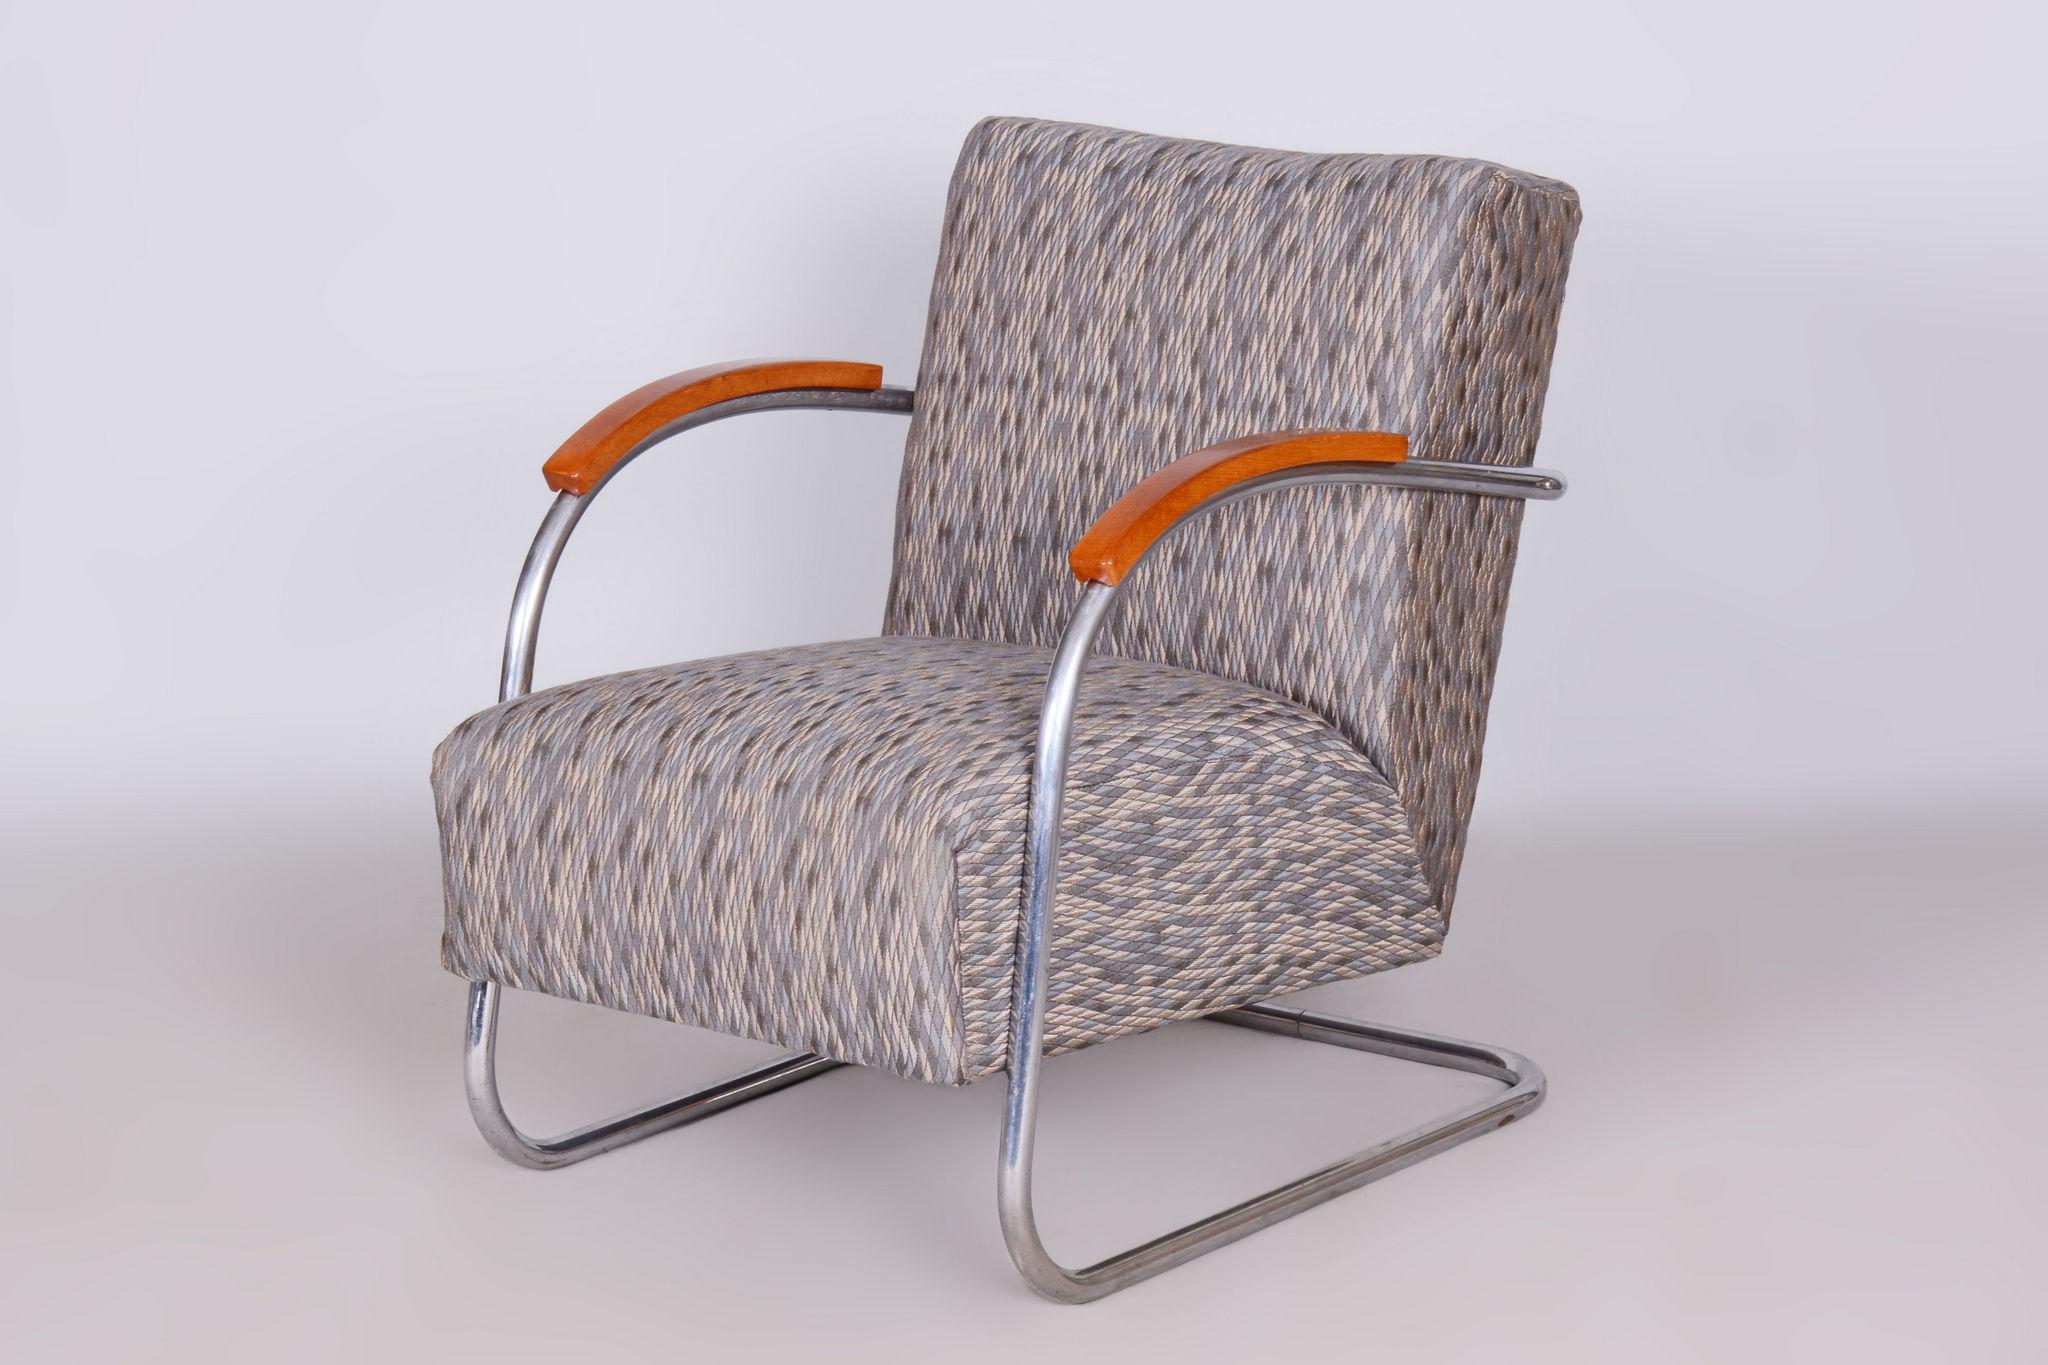 Restored Bauhaus Armchair by Mücke - Melder

Source: Czechia (Czehoslovakia)
Period: 1930-1939
Material: Upholstery, Chrome-Plated Steel, Beech

Made by Mücke Melder, an influential modernist furniture manufacturer that specialized in tubular steel